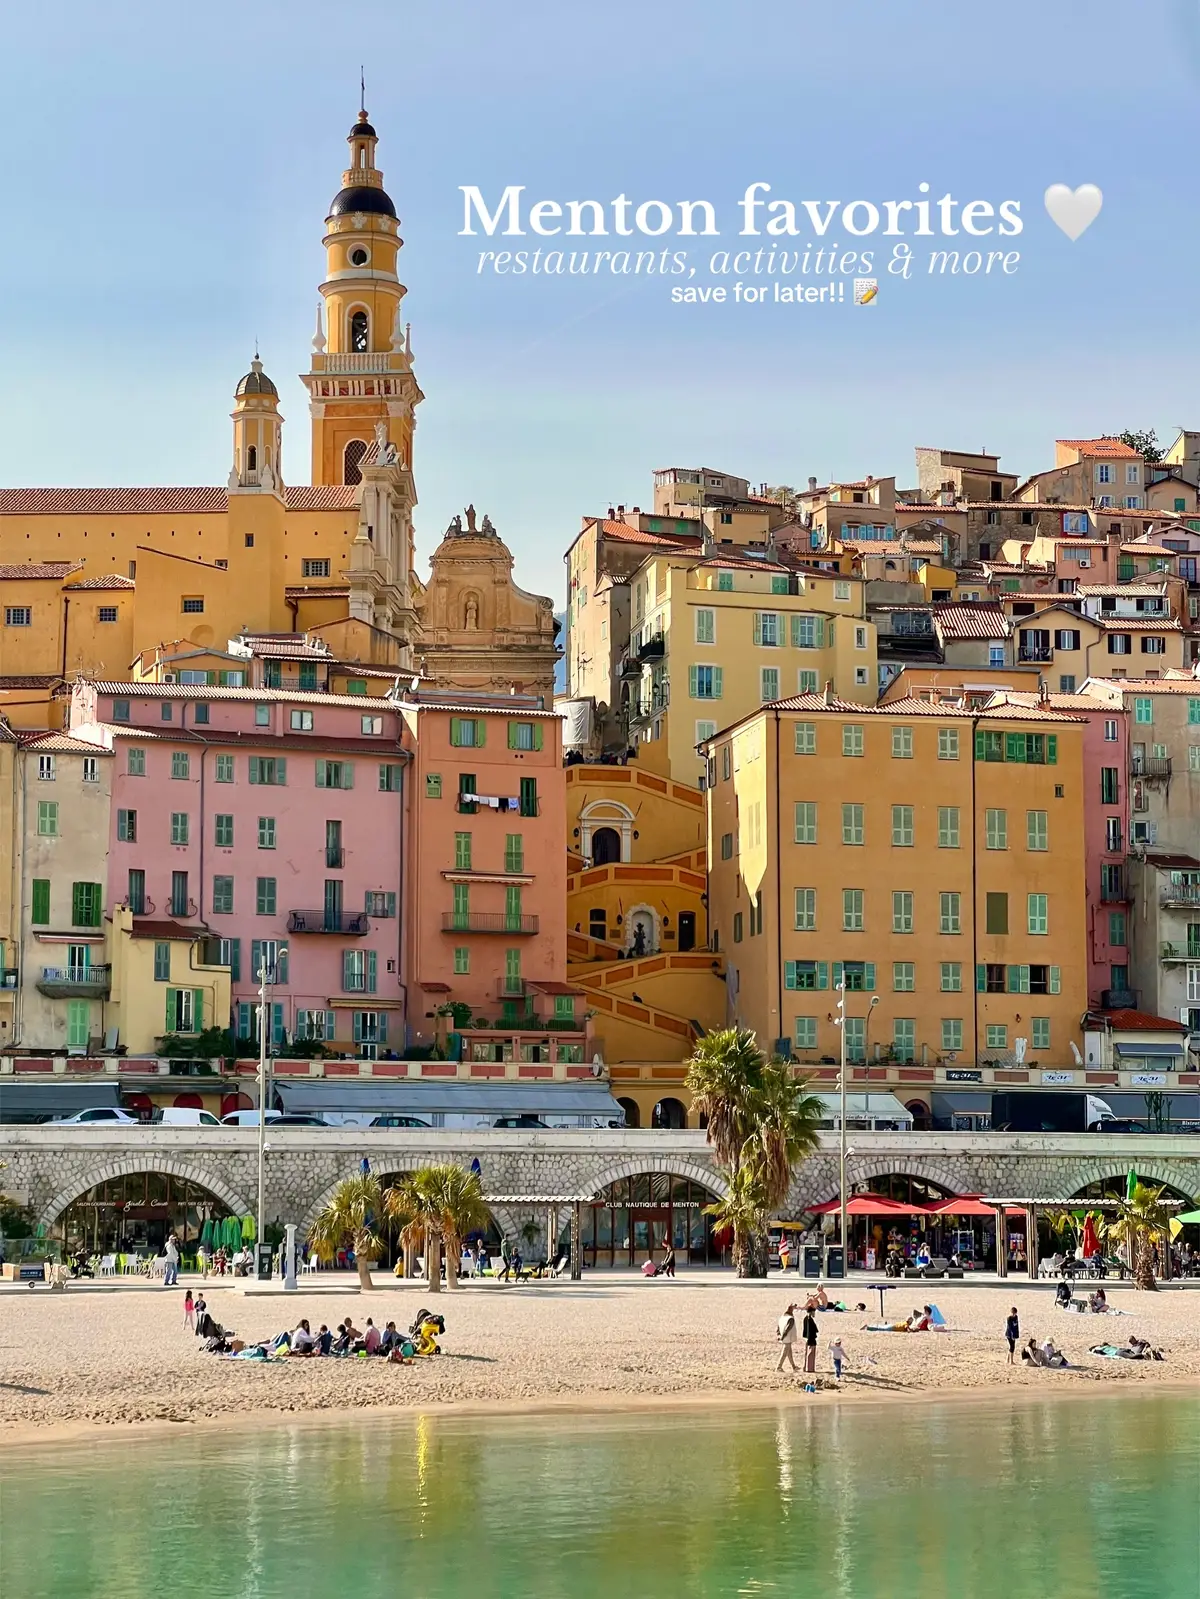 everything i love and recommend about this little gem in the South of France 🍋 as someone who’s gone 10+ times #menton #southoffrance #frenchriviera #mentonfrance #mentonrestaurant #southoffrancereccomendations 